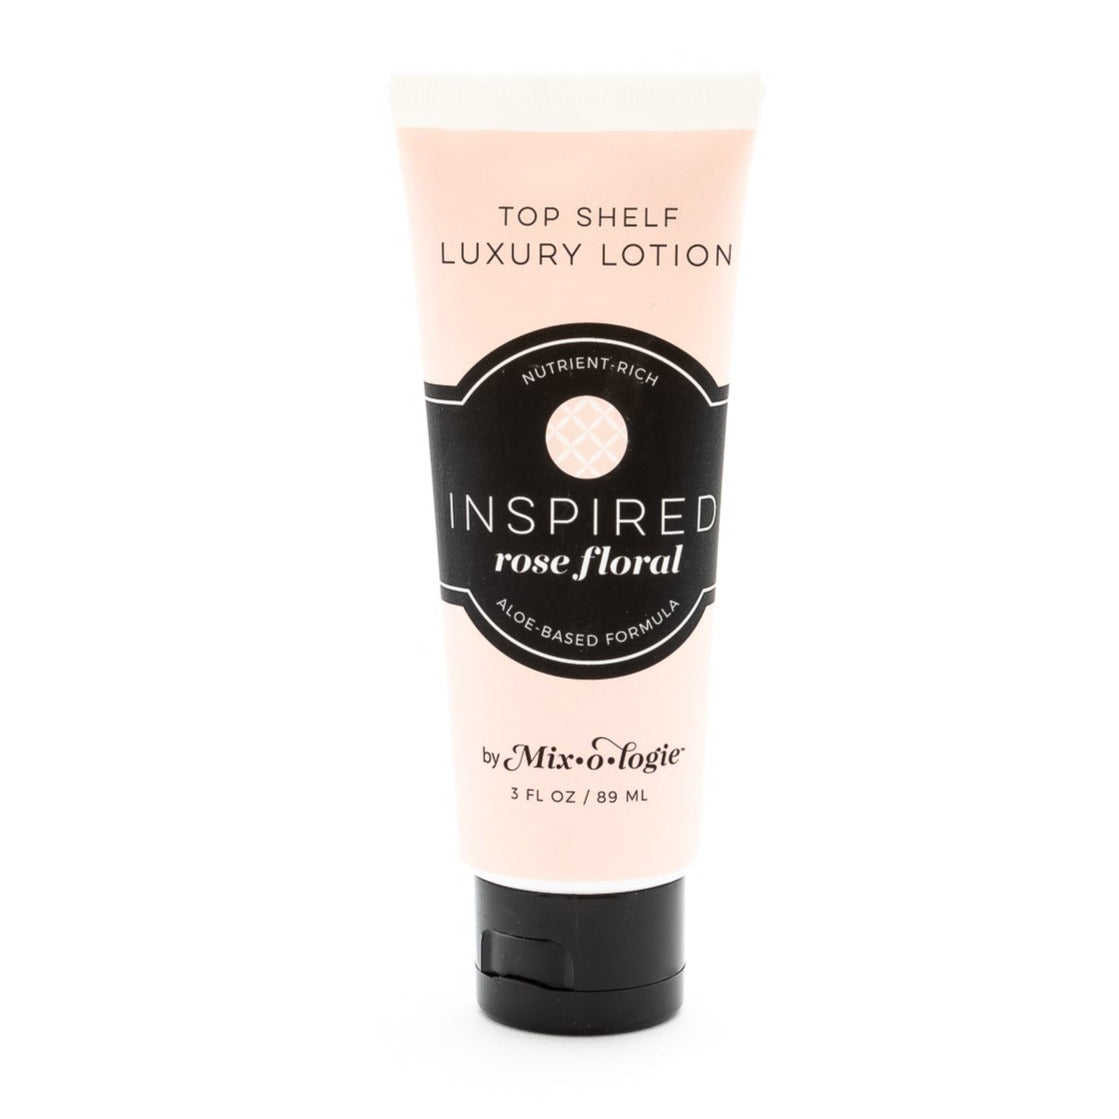 Inspired (Rose Floral) Top Shelf Lotion in pale pink tube with black lid and label. Nutrient rich, aloe-based formula, tube has 5 fl oz or 89 mL. Pictured with white background,.